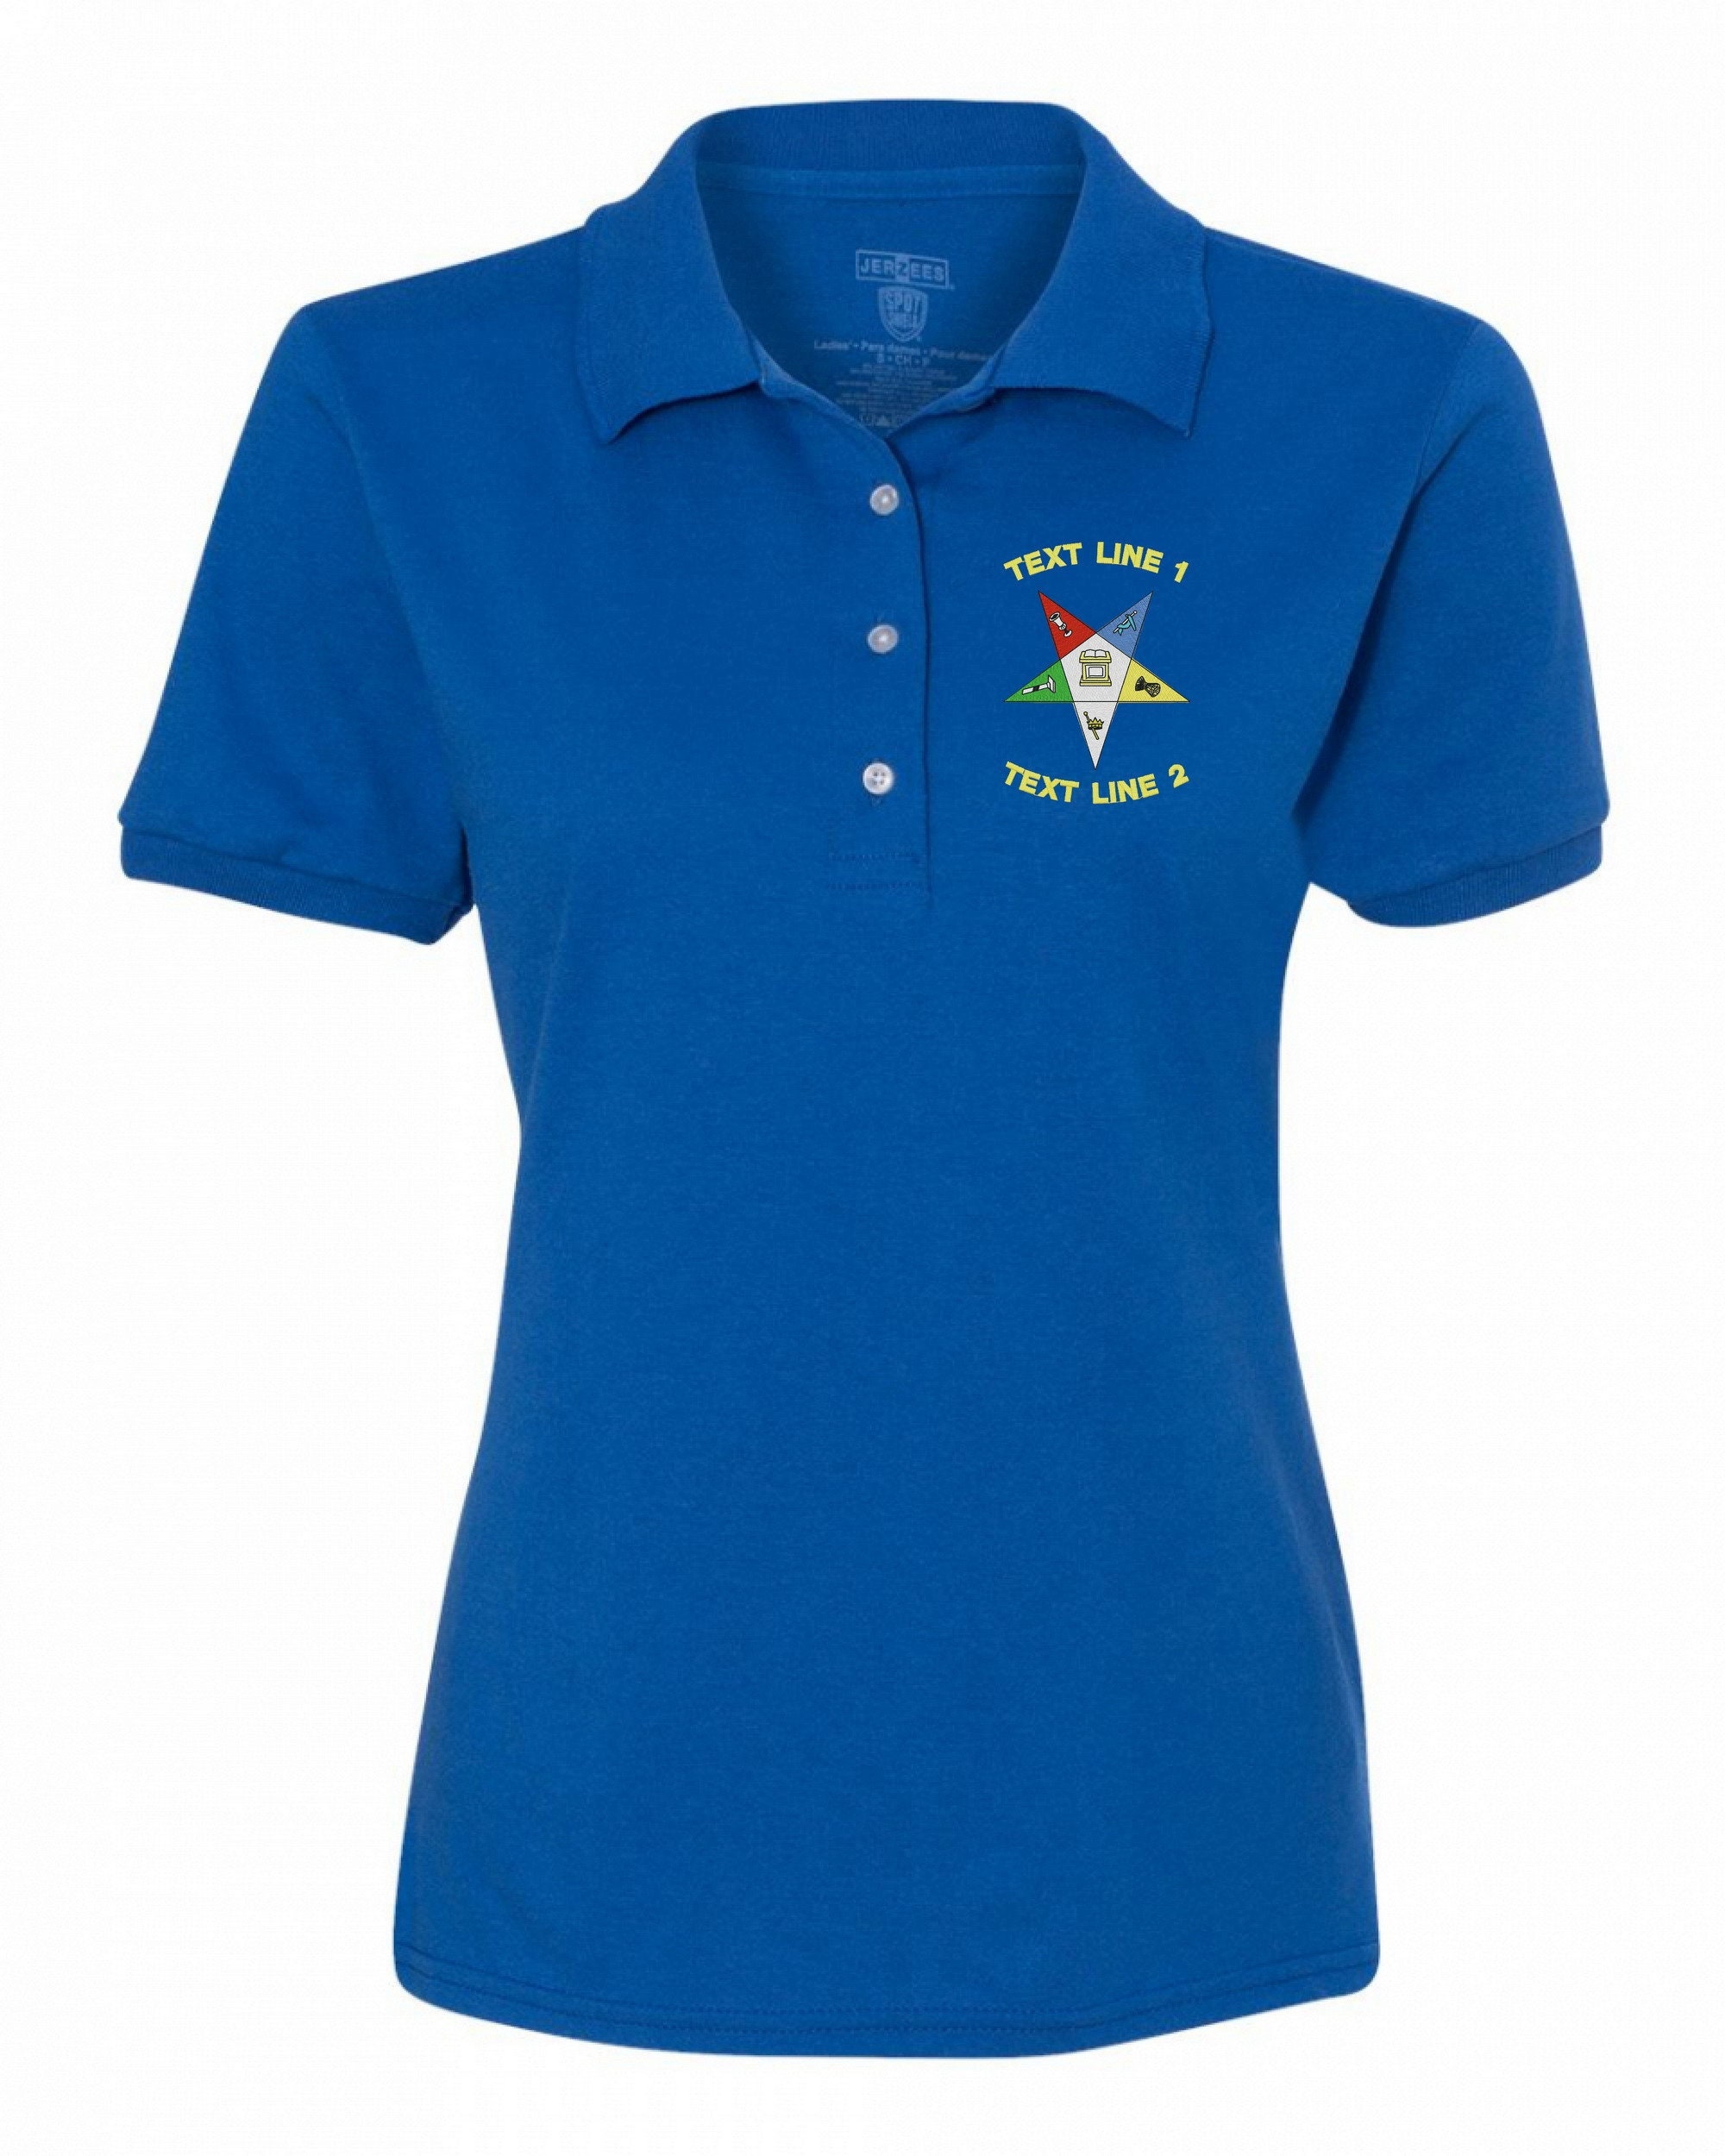 OES Eastern Star Embroidered Ladies Polo Shirt - Fraternal Awards